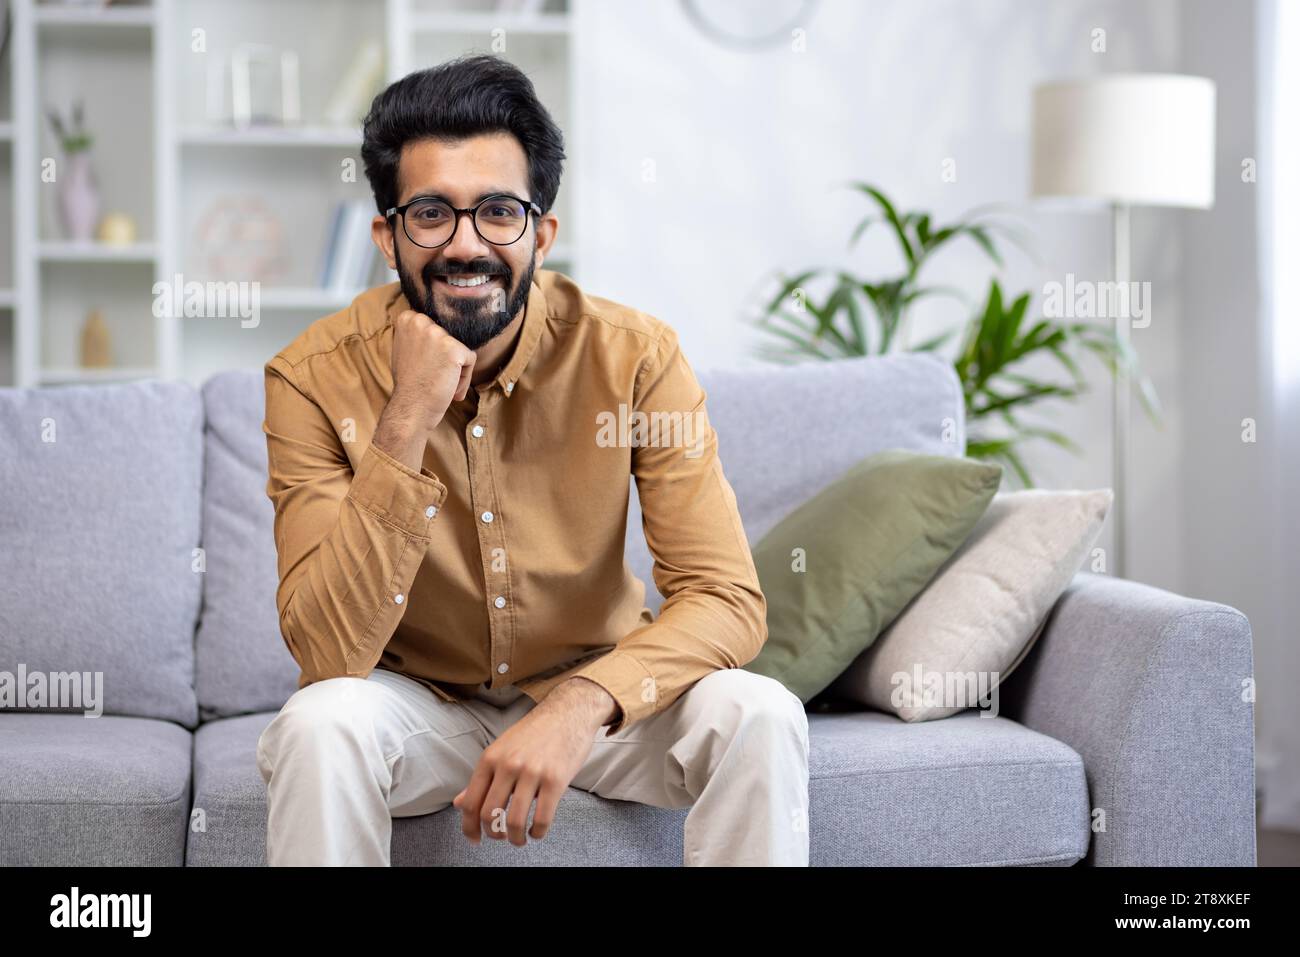 Portrait of a young Indian man sitting on the sofa at home, resting his hand on his chin, confidently and smilingly looking at the camera. Stock Photo